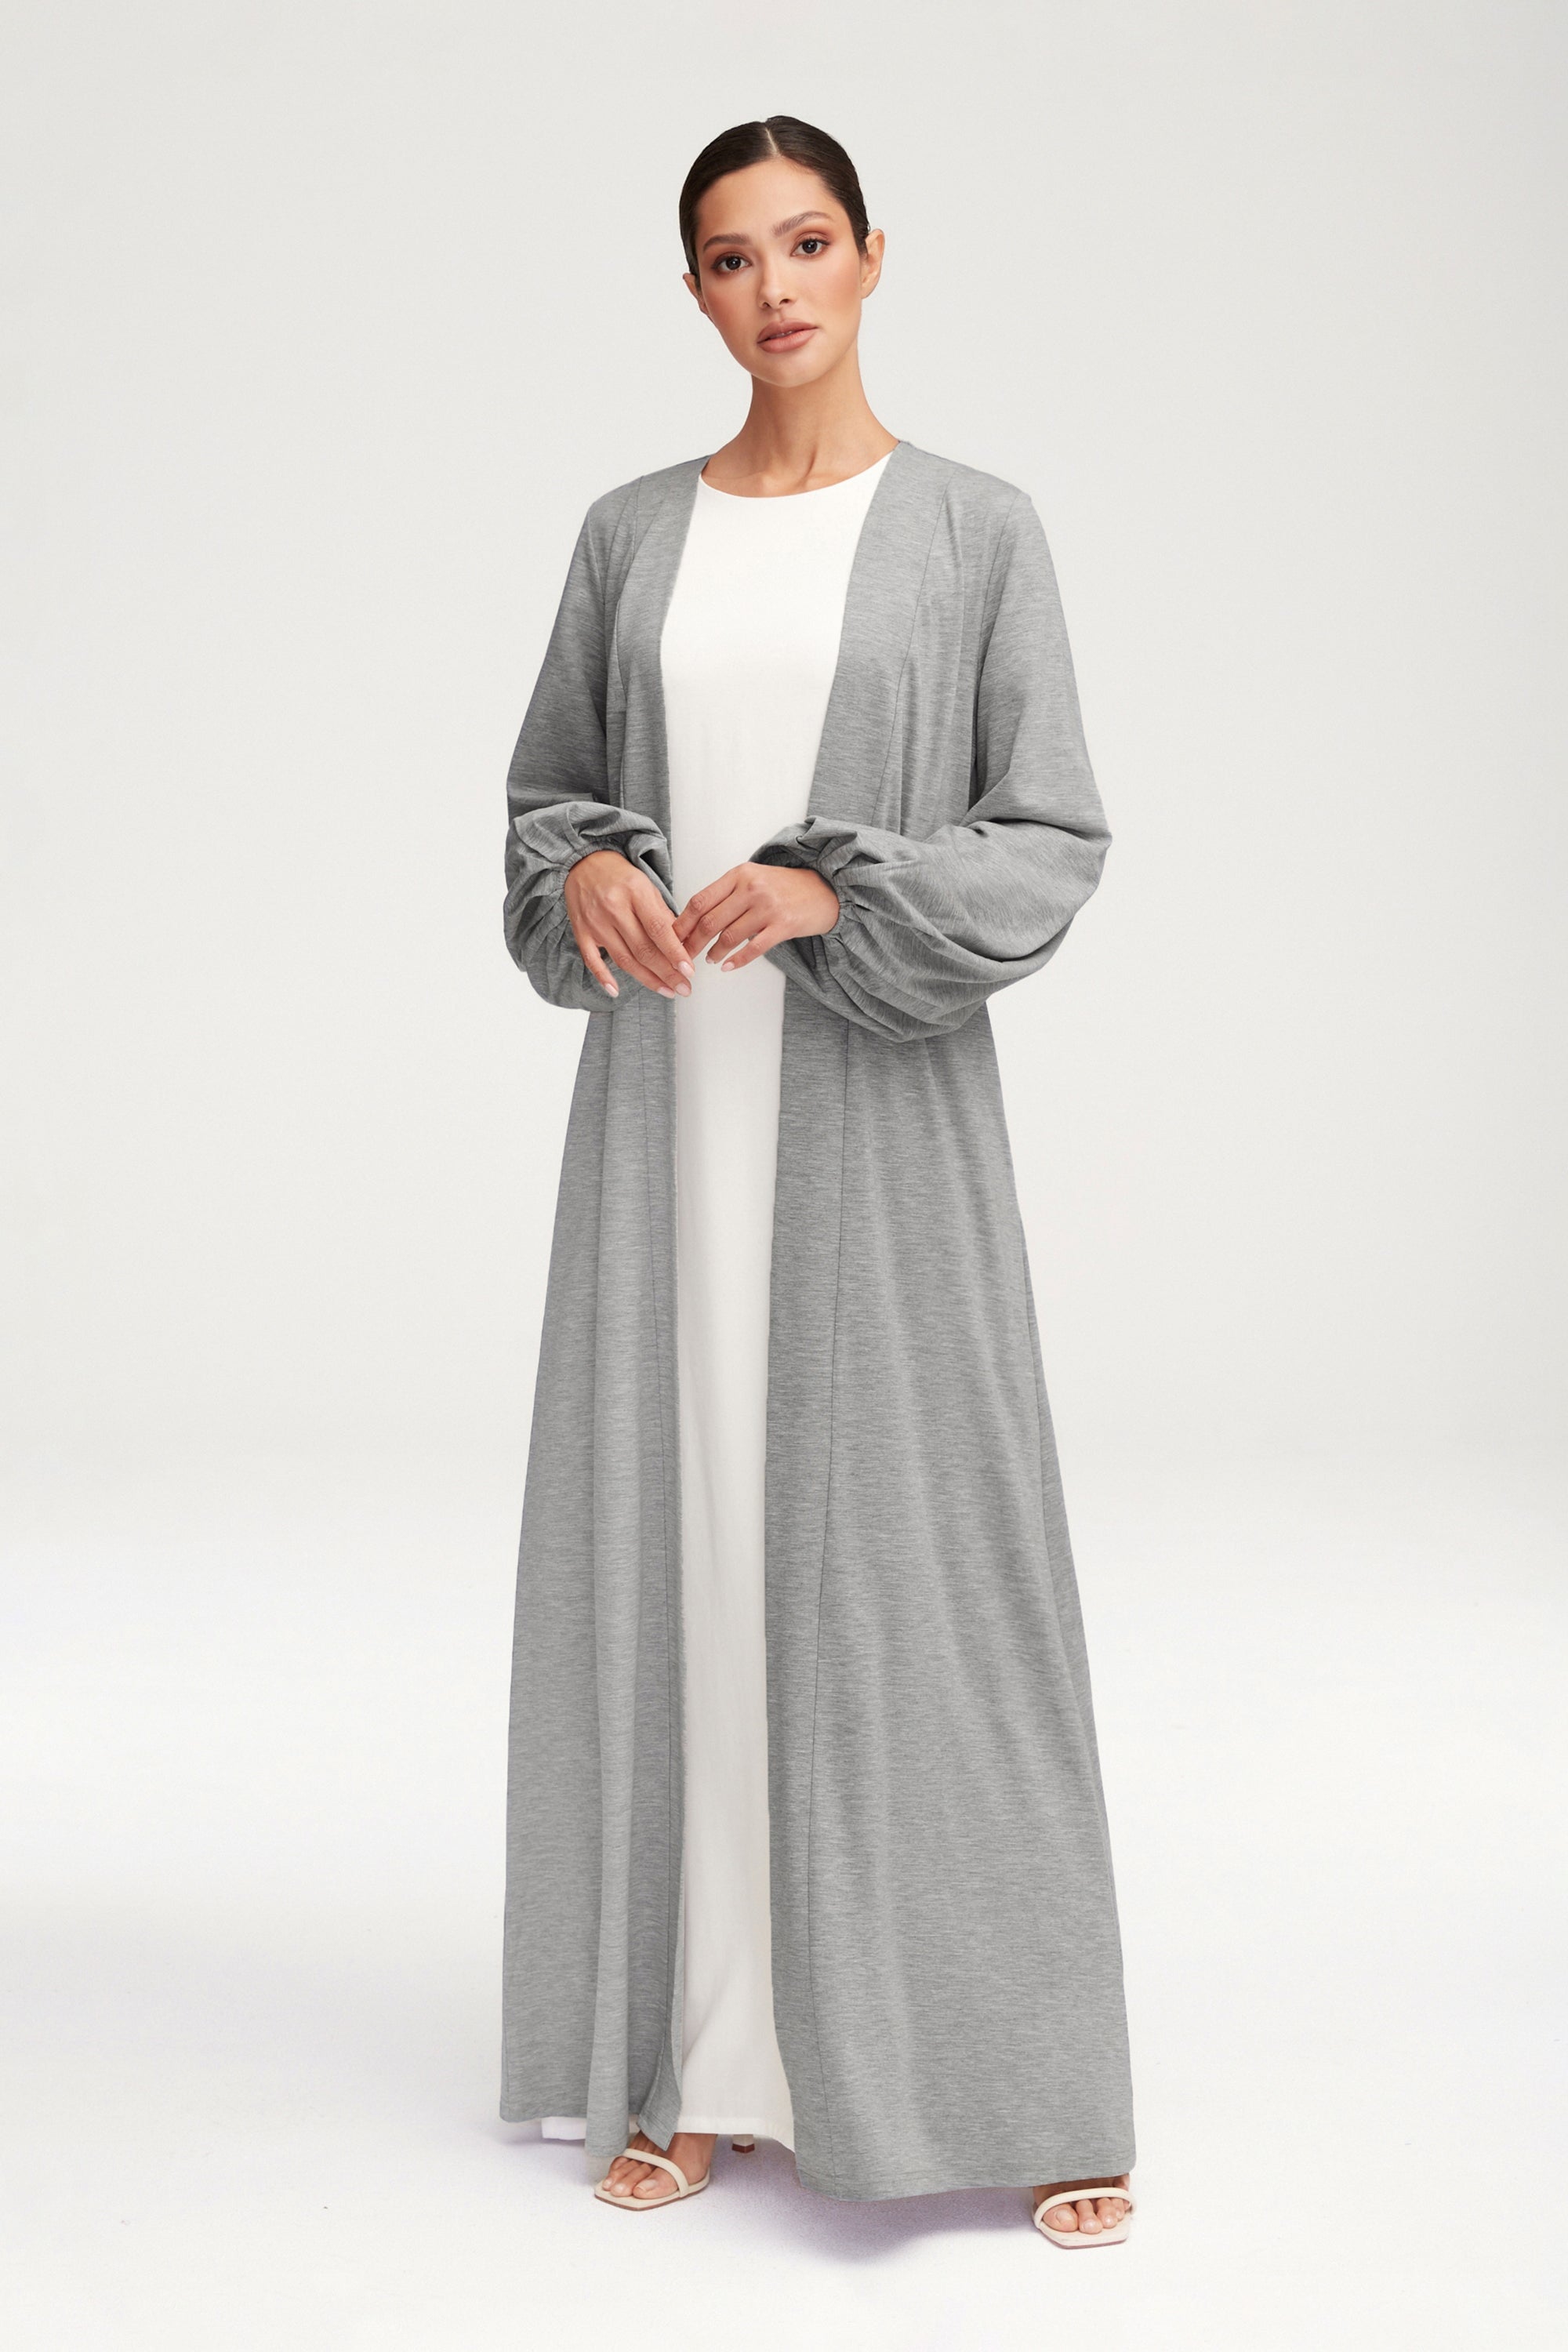 Essential Jersey Open Abaya - Heather Grey Clothing Veiled 